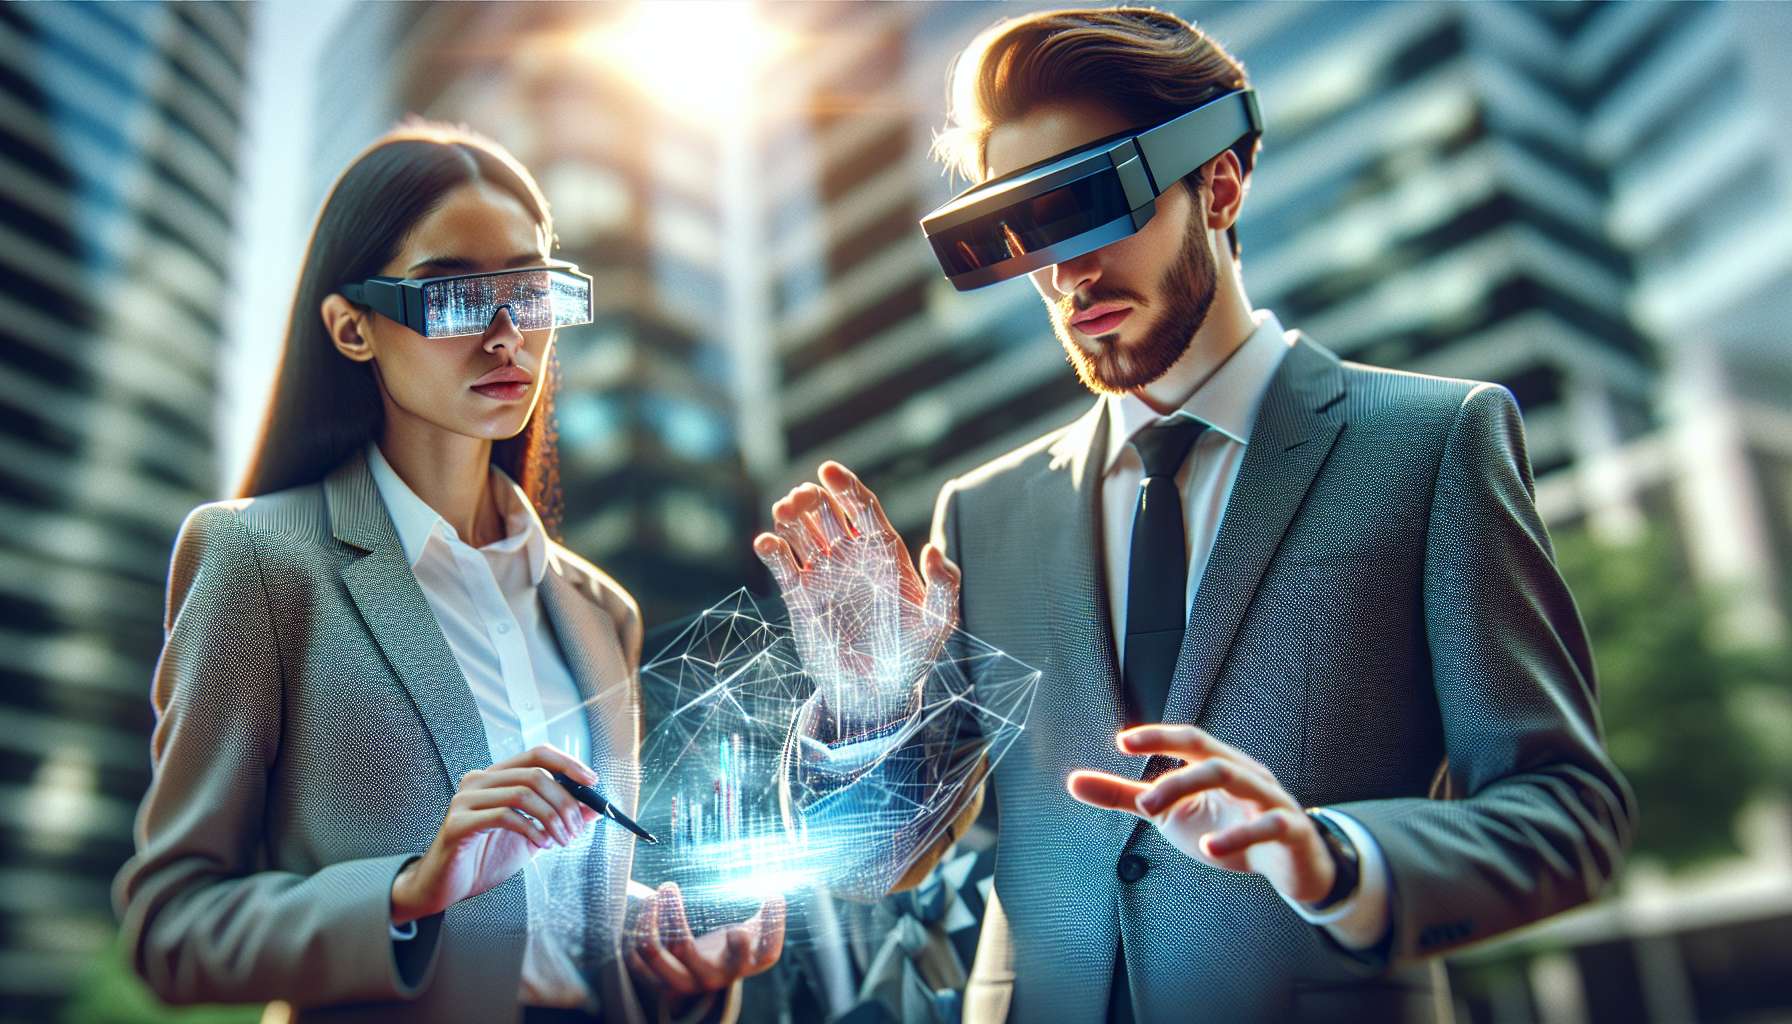 Building Business: Enhancing B2B Sales with AR Demonstrations